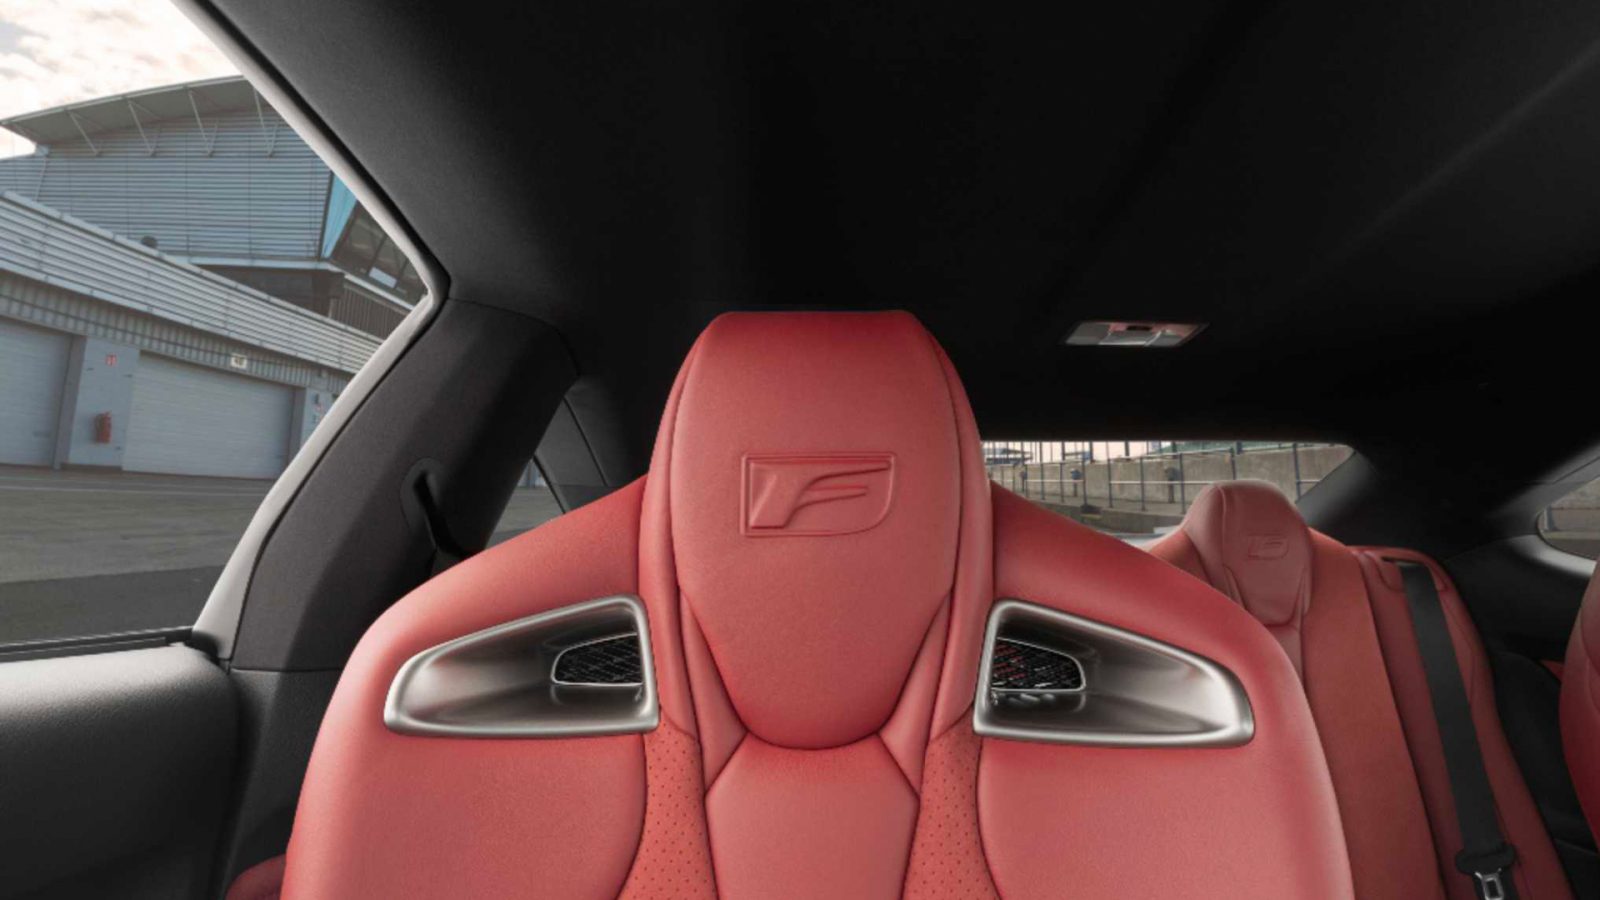 Lexus virtual backgrounds give you the best seat in the house - Lexus UK  Magazine